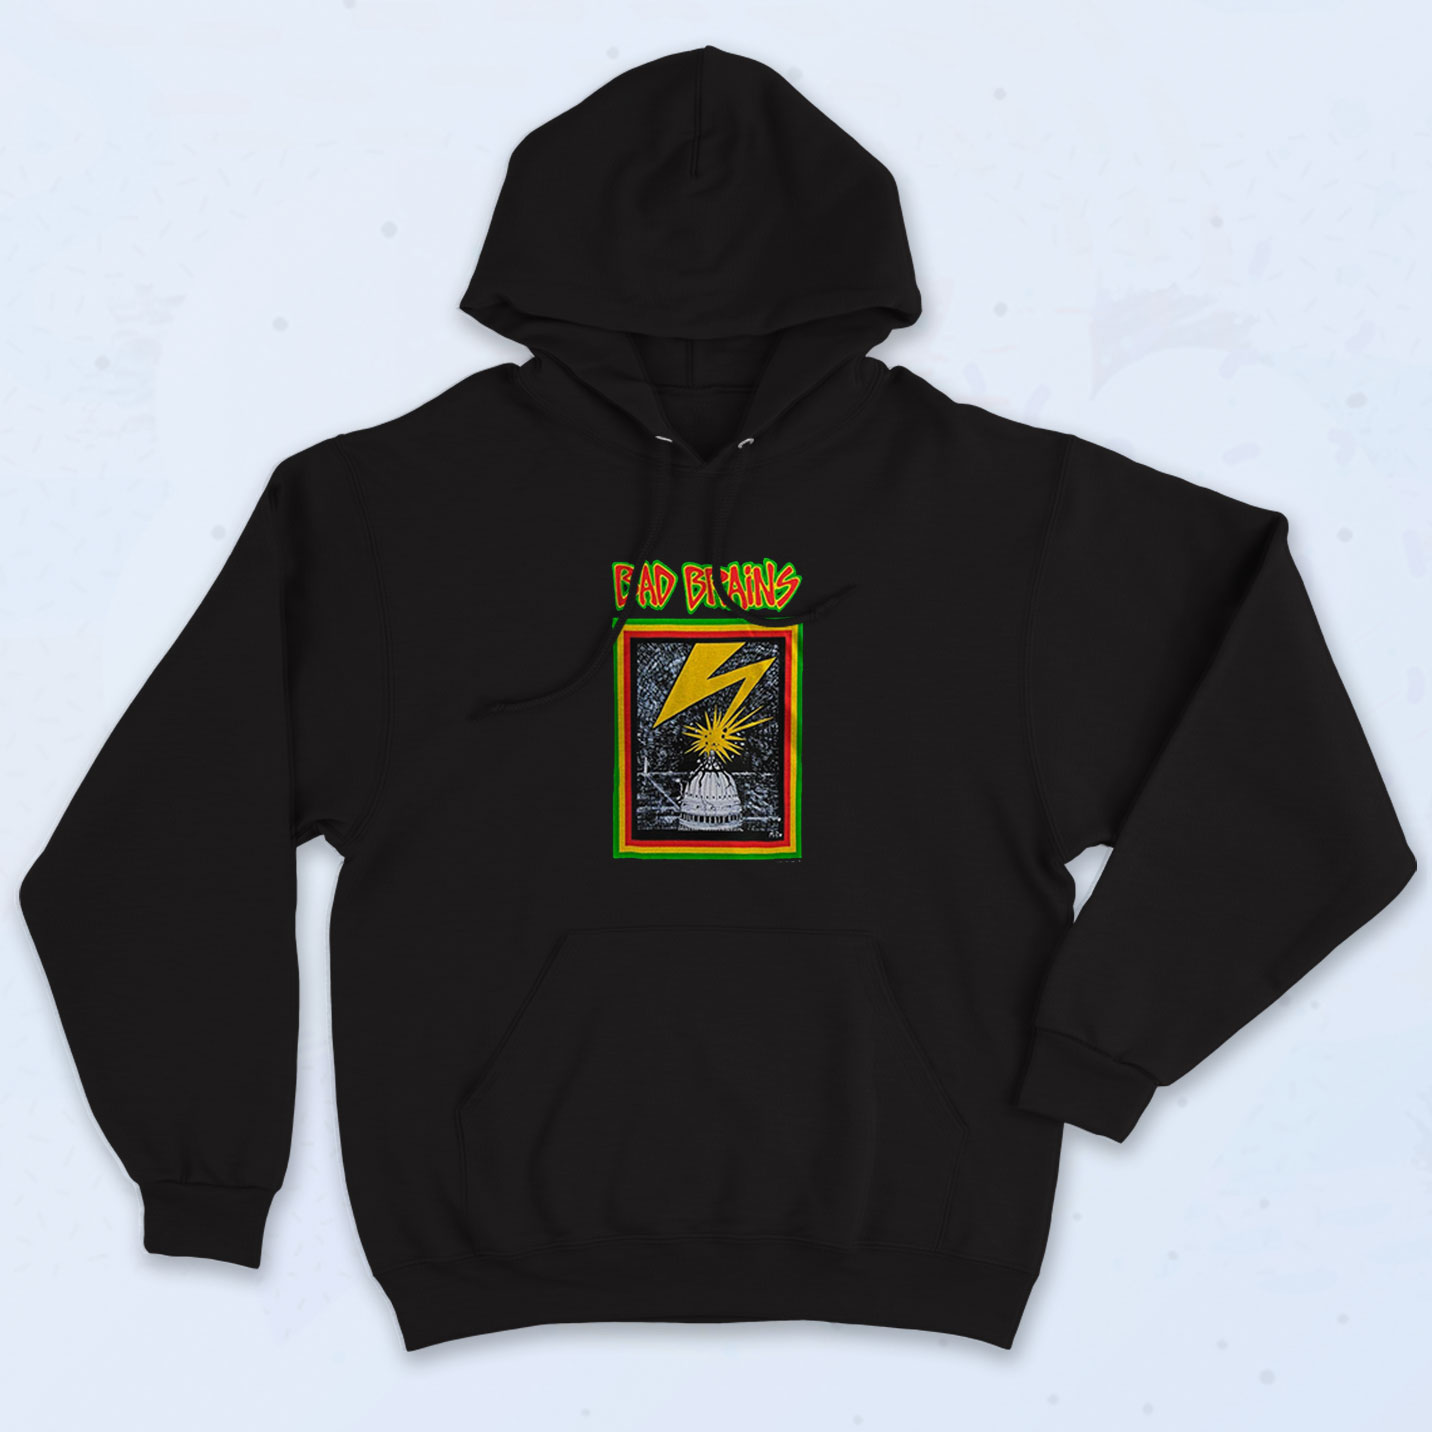 Bad Brains Graphic Hoodie On Sale - 90sclothes.com